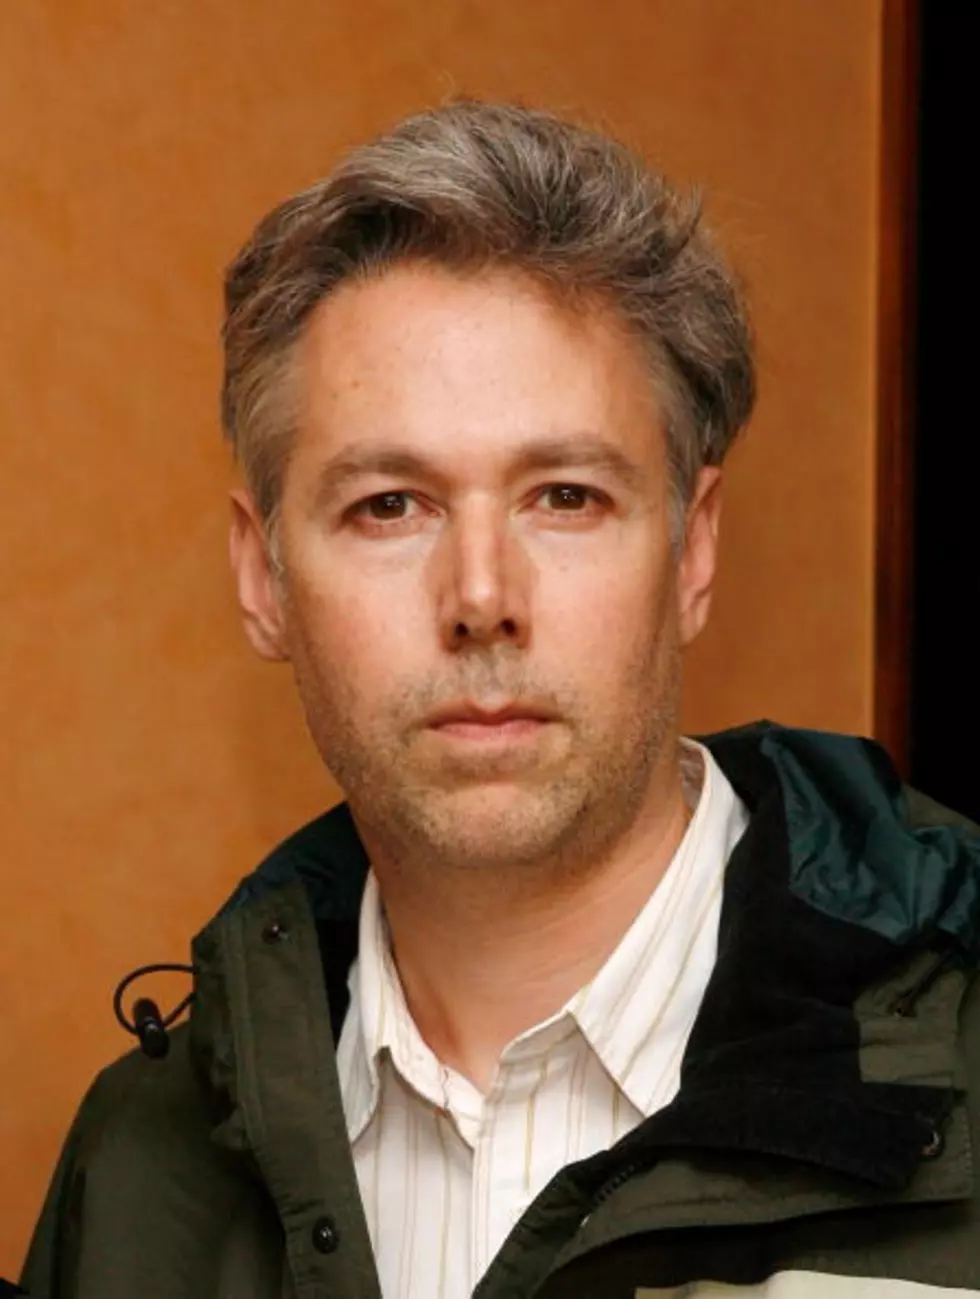 Beastie Boys’ Adam Yauch on Mend from Cancer